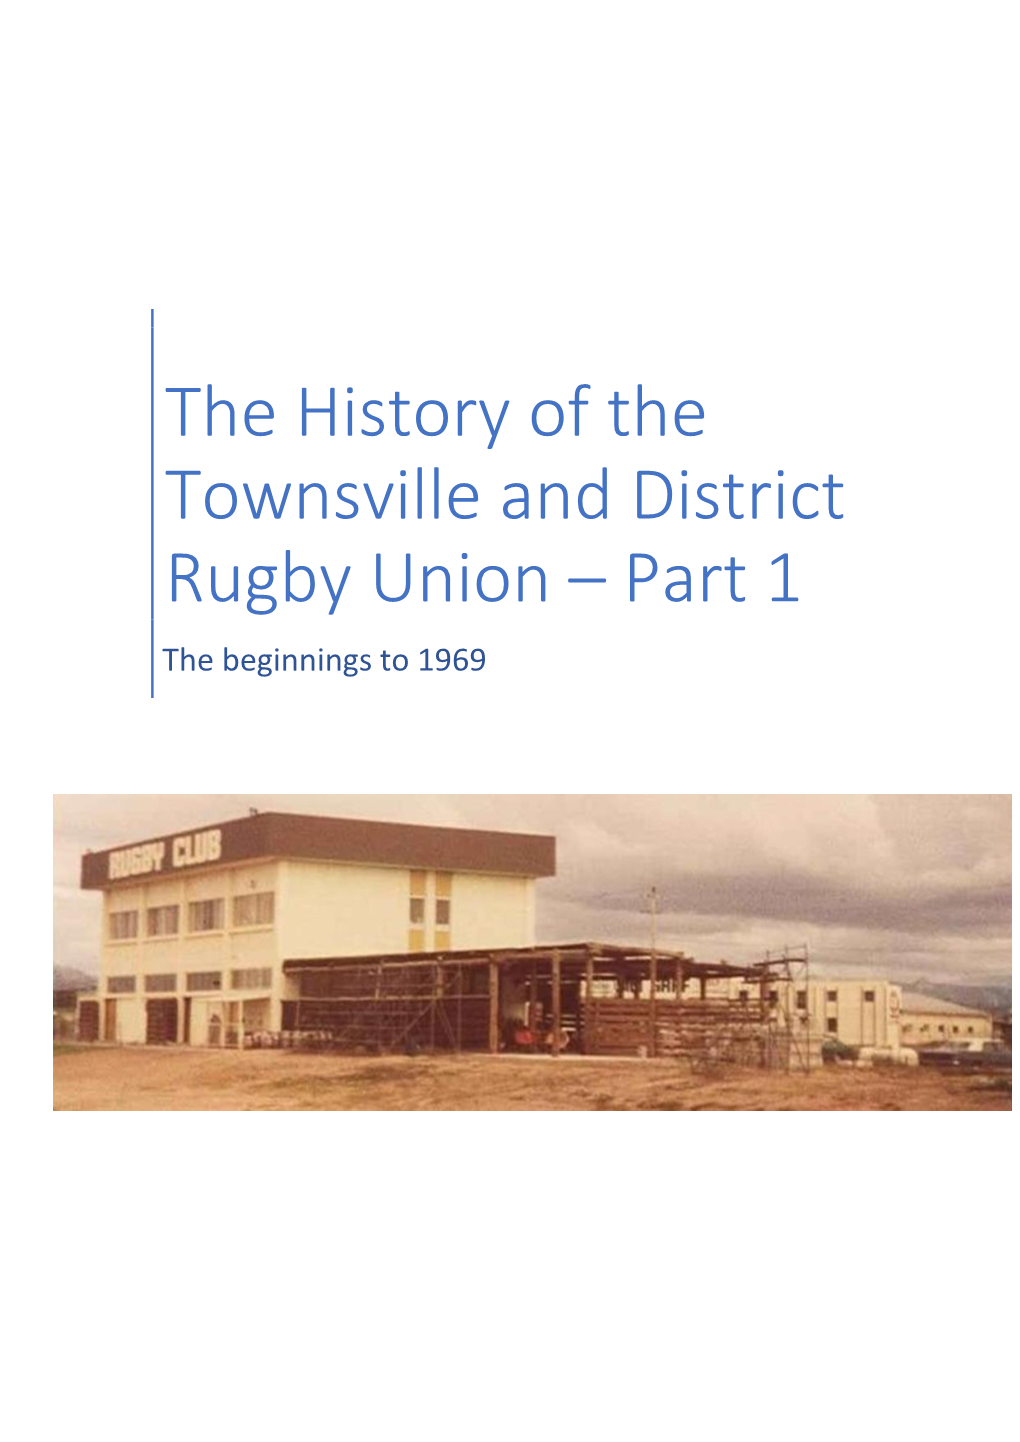 The History of the Townsville and District Rugby Union – Part 1